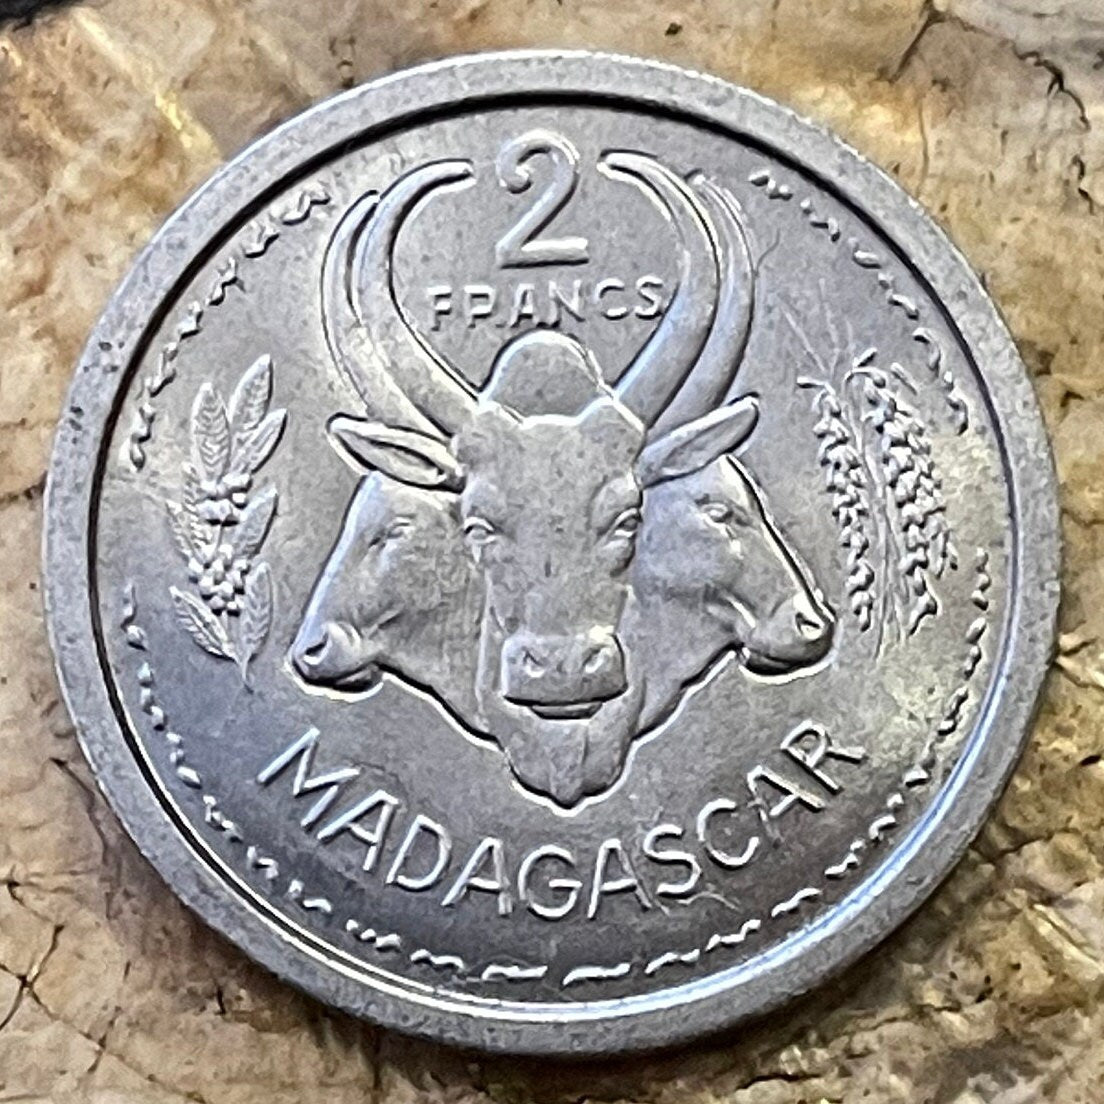 Three Zebu & Marianne in Winged Phrygian Cap 2 Francs Madagascar Authentic Coin Money for Jewelry and Craft Making (Omby) 1948